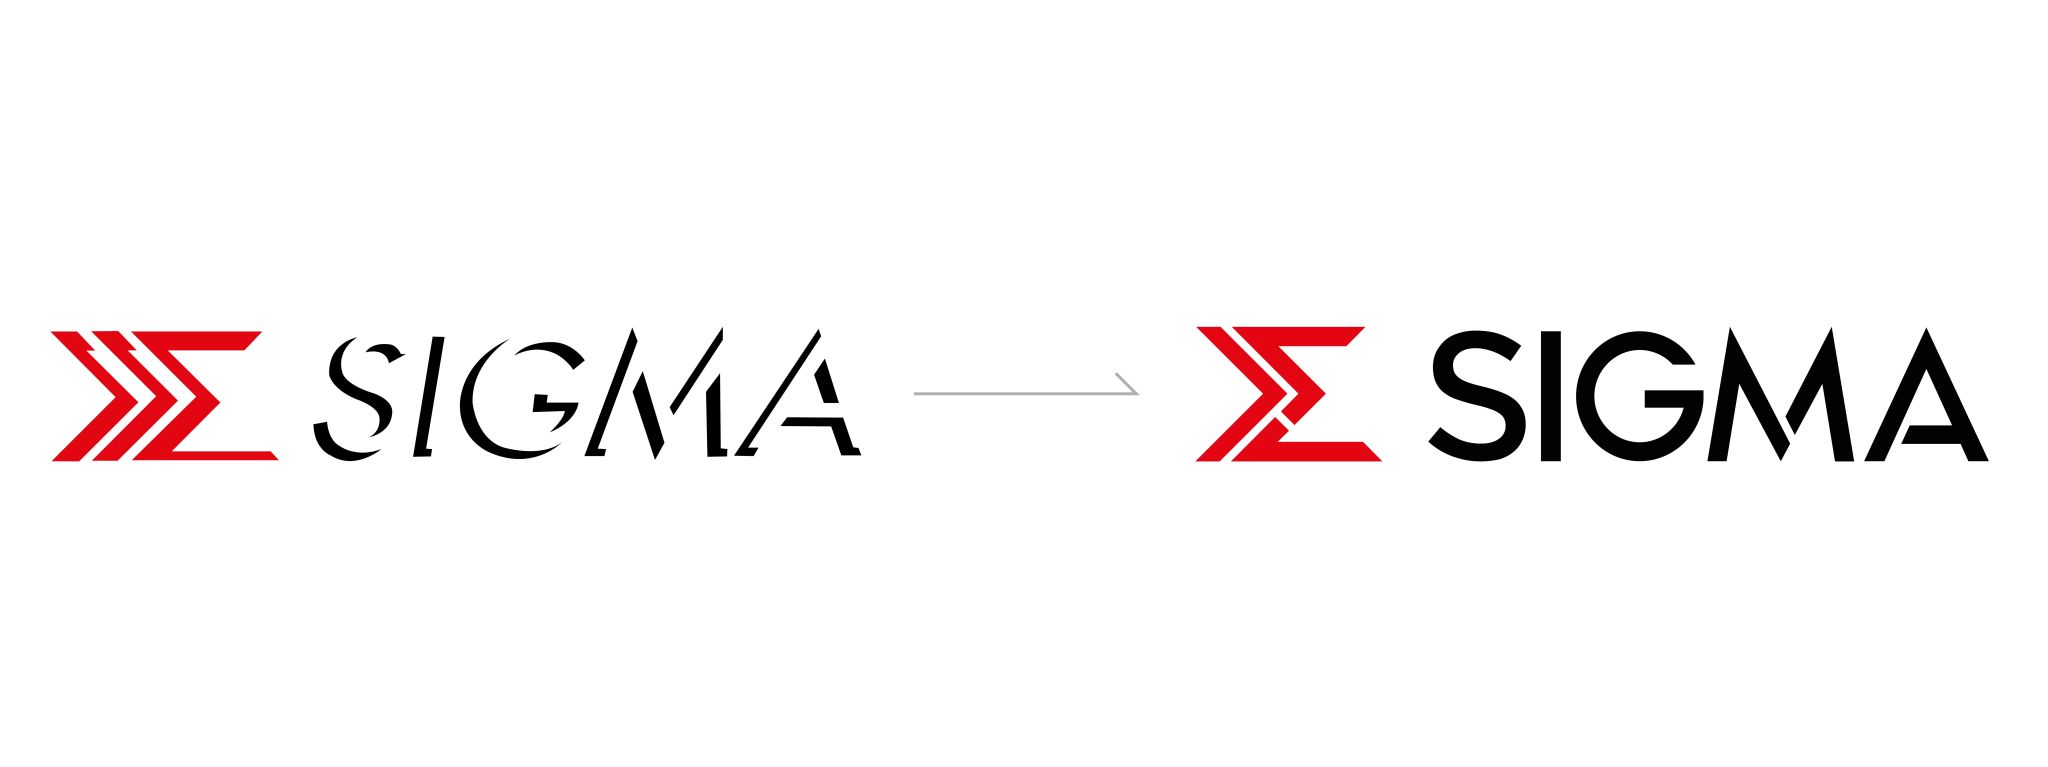 Sigma has a New Logo after 40 Years